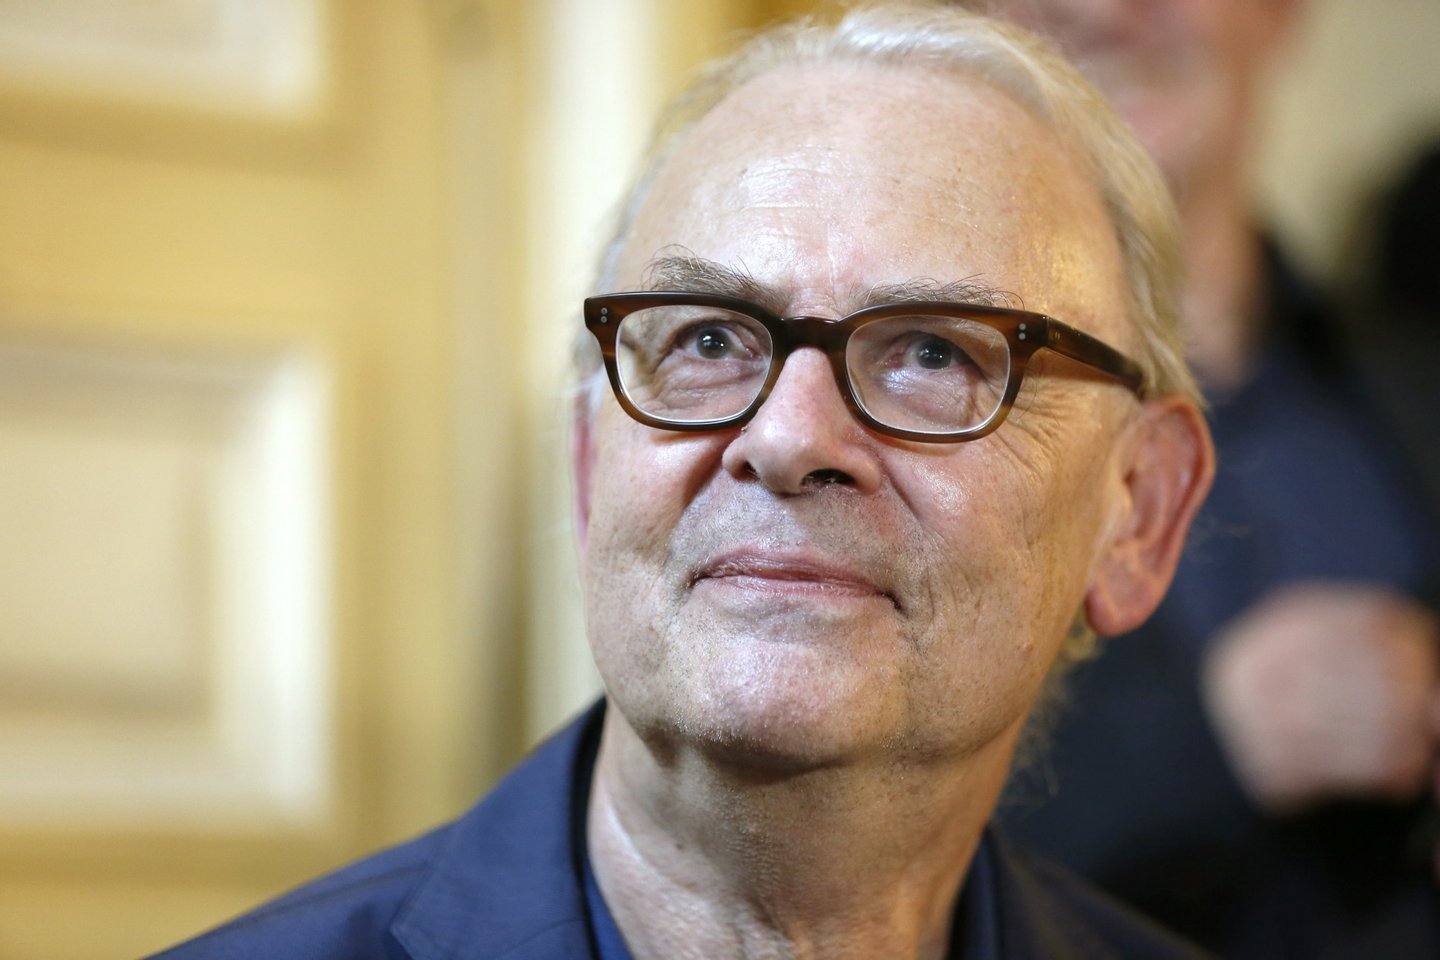 French writer Patrick Modiano gives a press conference in Paris, on October 9, 2014, following the announcement of his Nobel Literature Prize earlier in the day. Modiano, a historical novelist haunted by France's painful experience of Nazi occupation and his own childhood wounds, won the Nobel Literature Prize on Thursday. AFP PHOTO / THOMAS SAMSON (Photo credit should read THOMAS SAMSON/AFP/Getty Images)